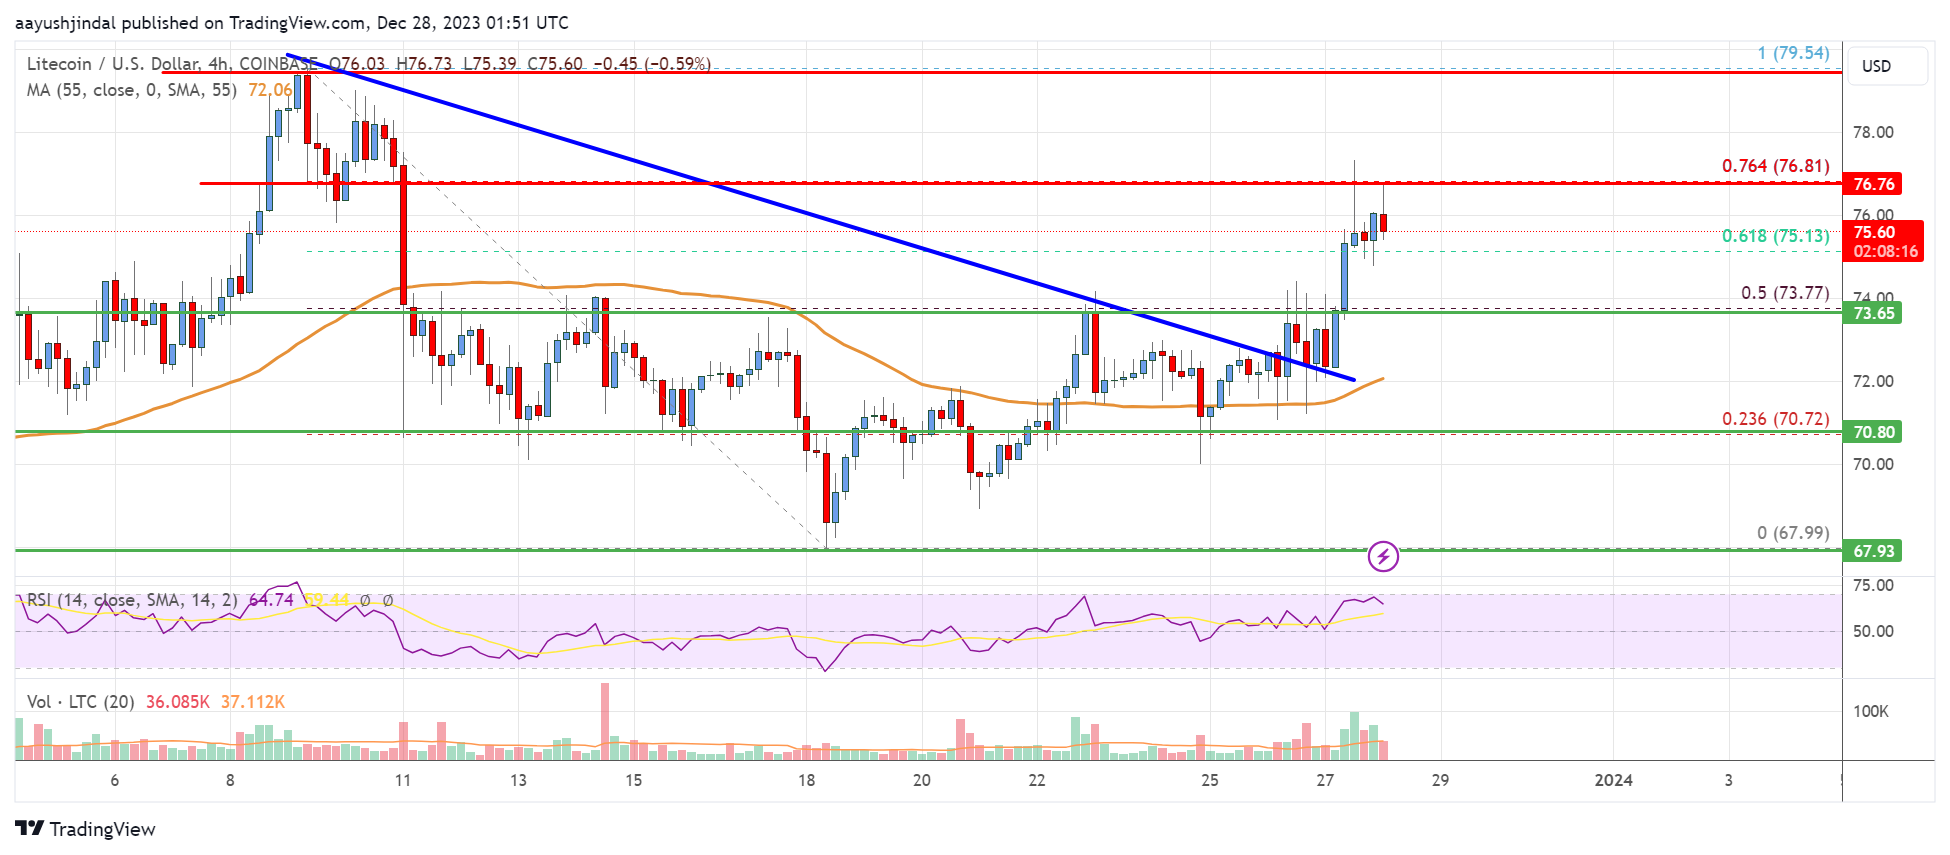 Litecoin (LTC) Price Analysis: Bulls Could Gain Strength Above This Hurdle